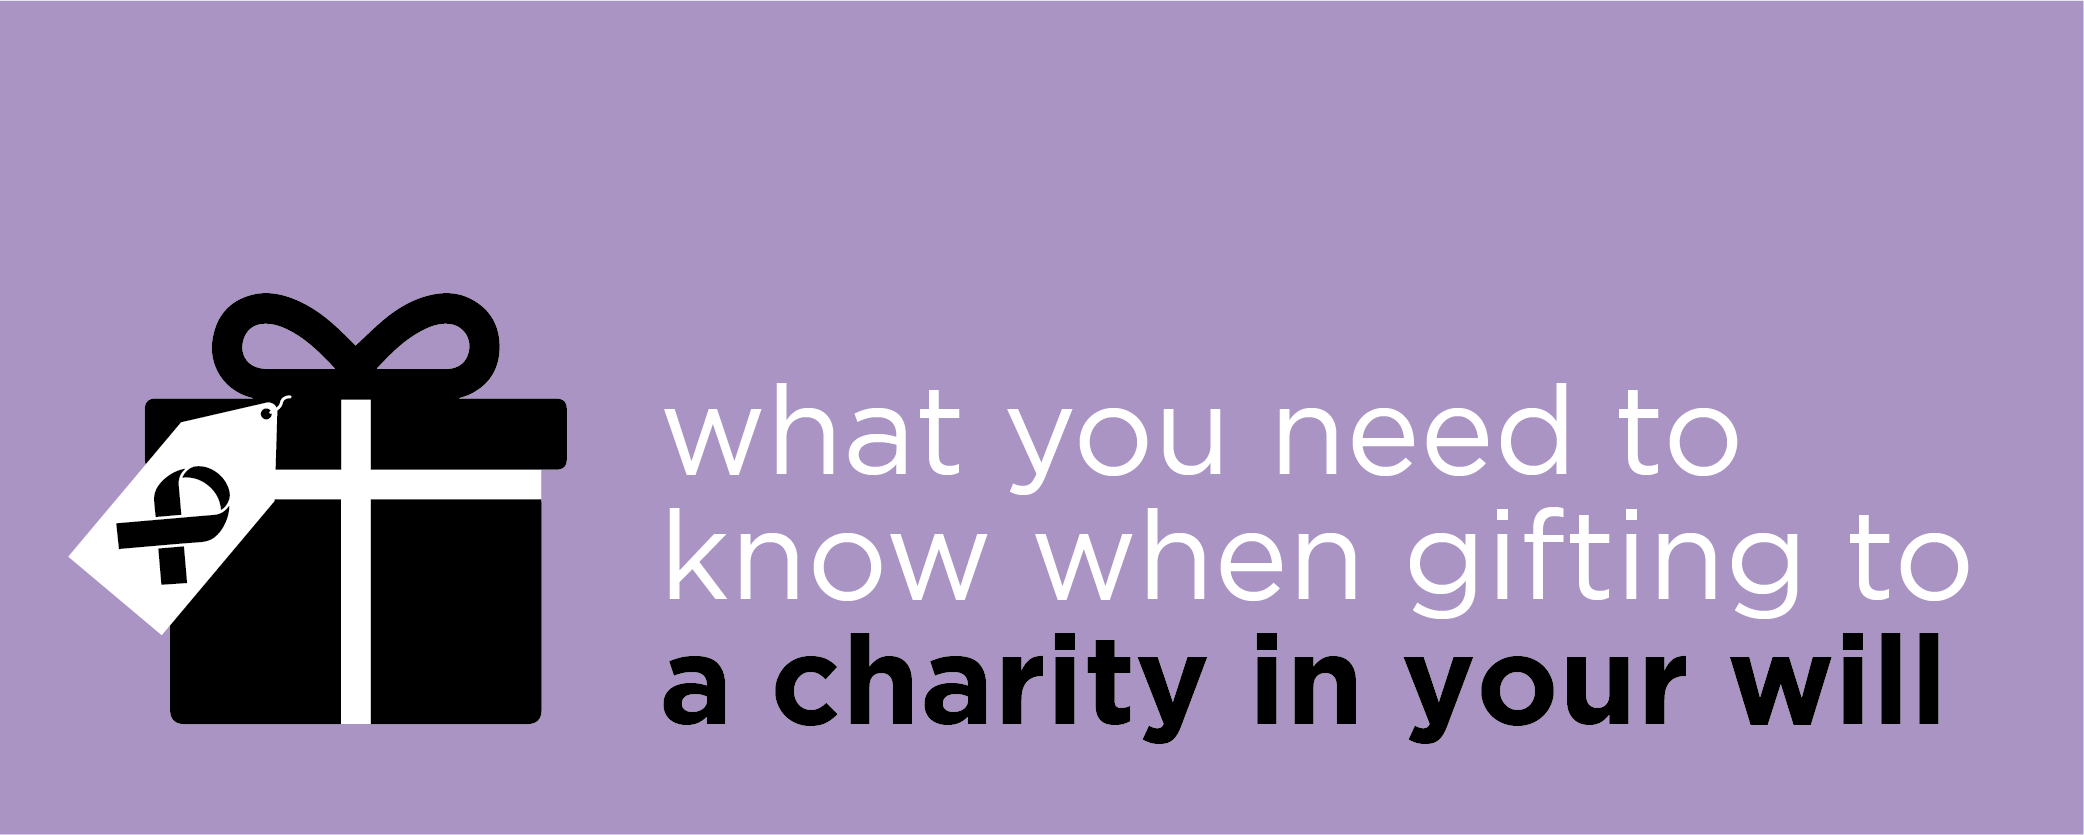 Giving to charity in your will